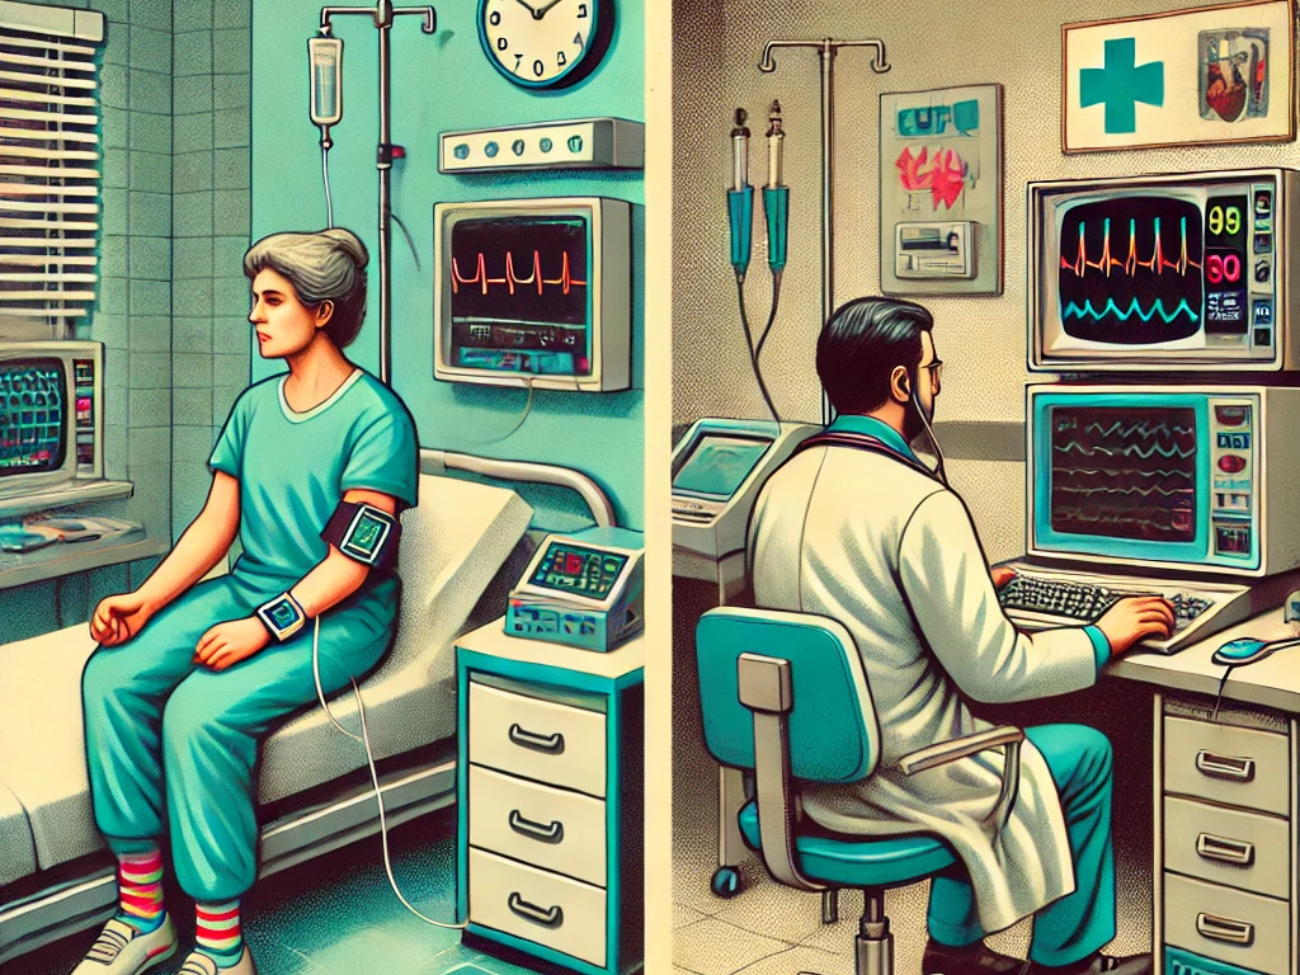 DALL·E 2024-06-27 09.43.02 - A 1980s-themed illustration of a telemedicine monitoring setup. The scene shows a patient at home wearing a wearable medical device connected to a vin